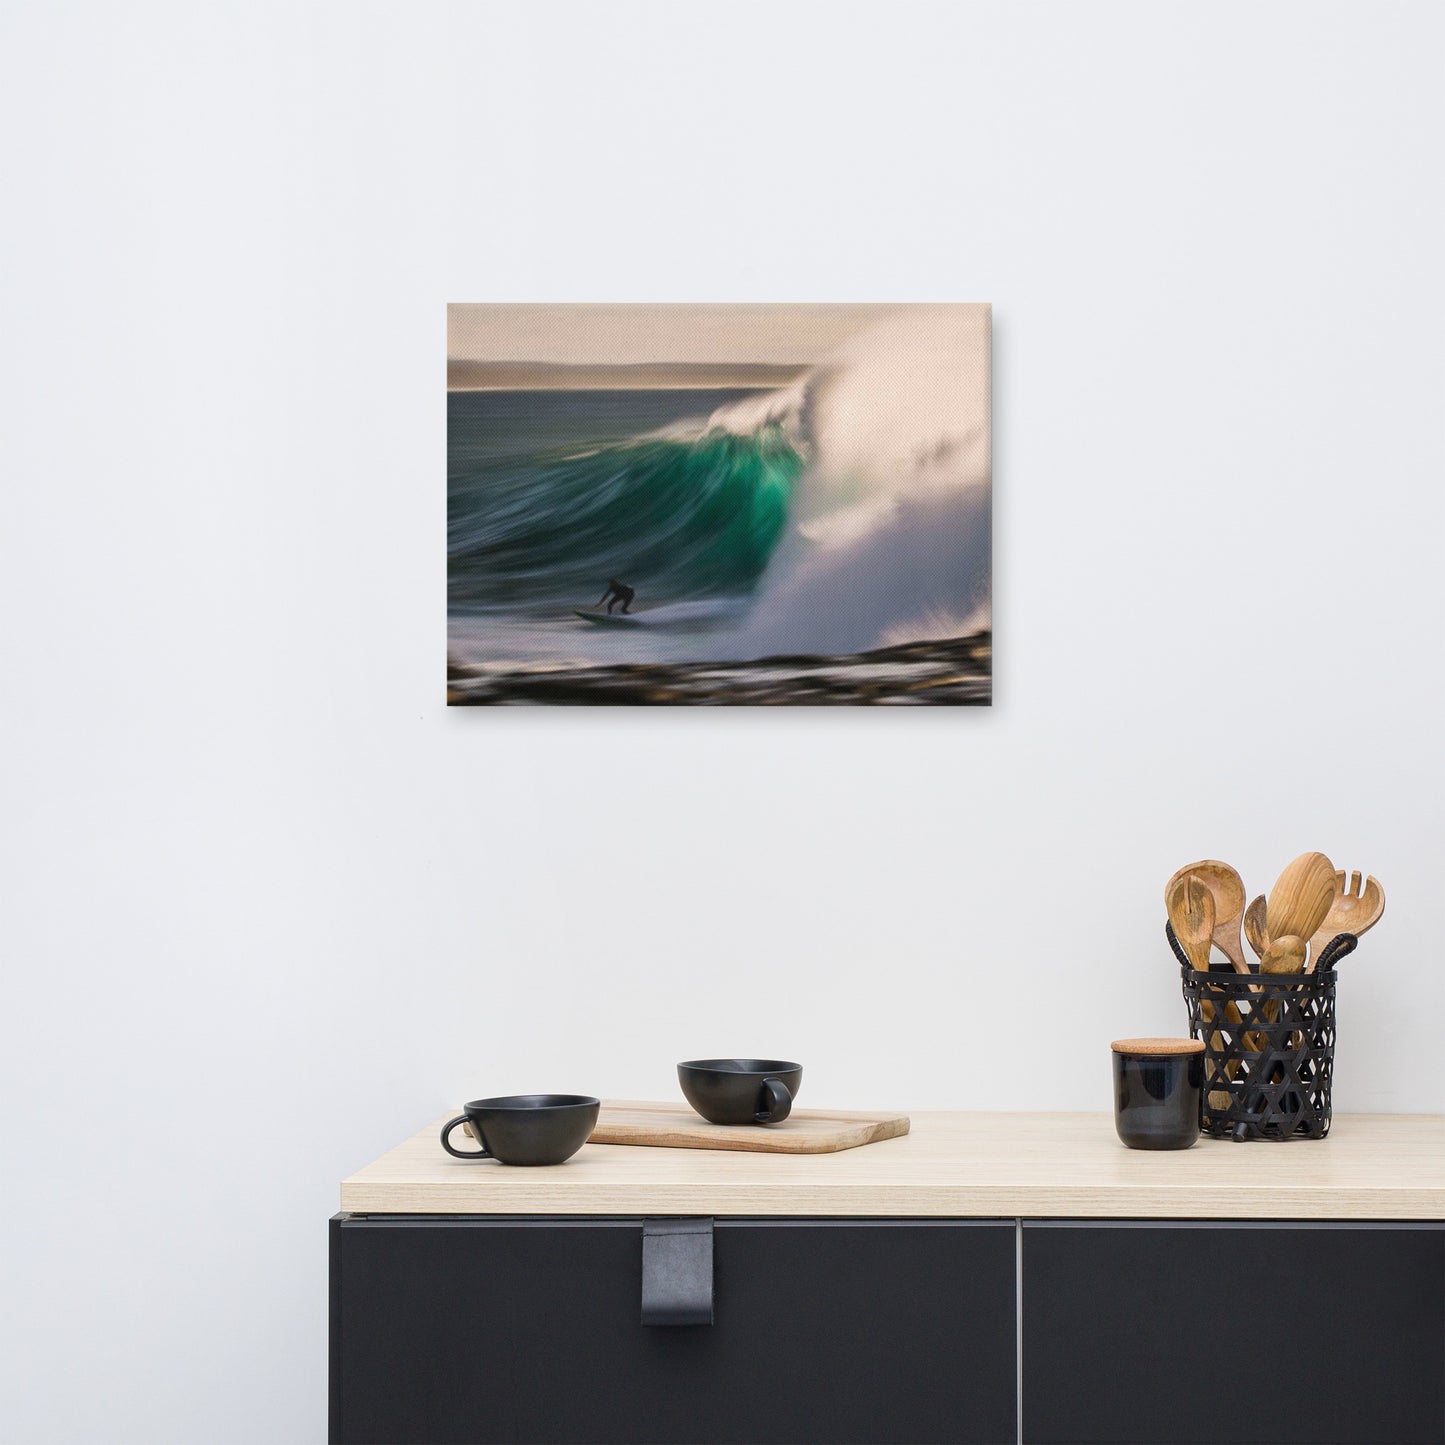 Dance of Water and Light Coastal Lifestyle / Abstract / Landscape Photograph Canvas Wall Art Print